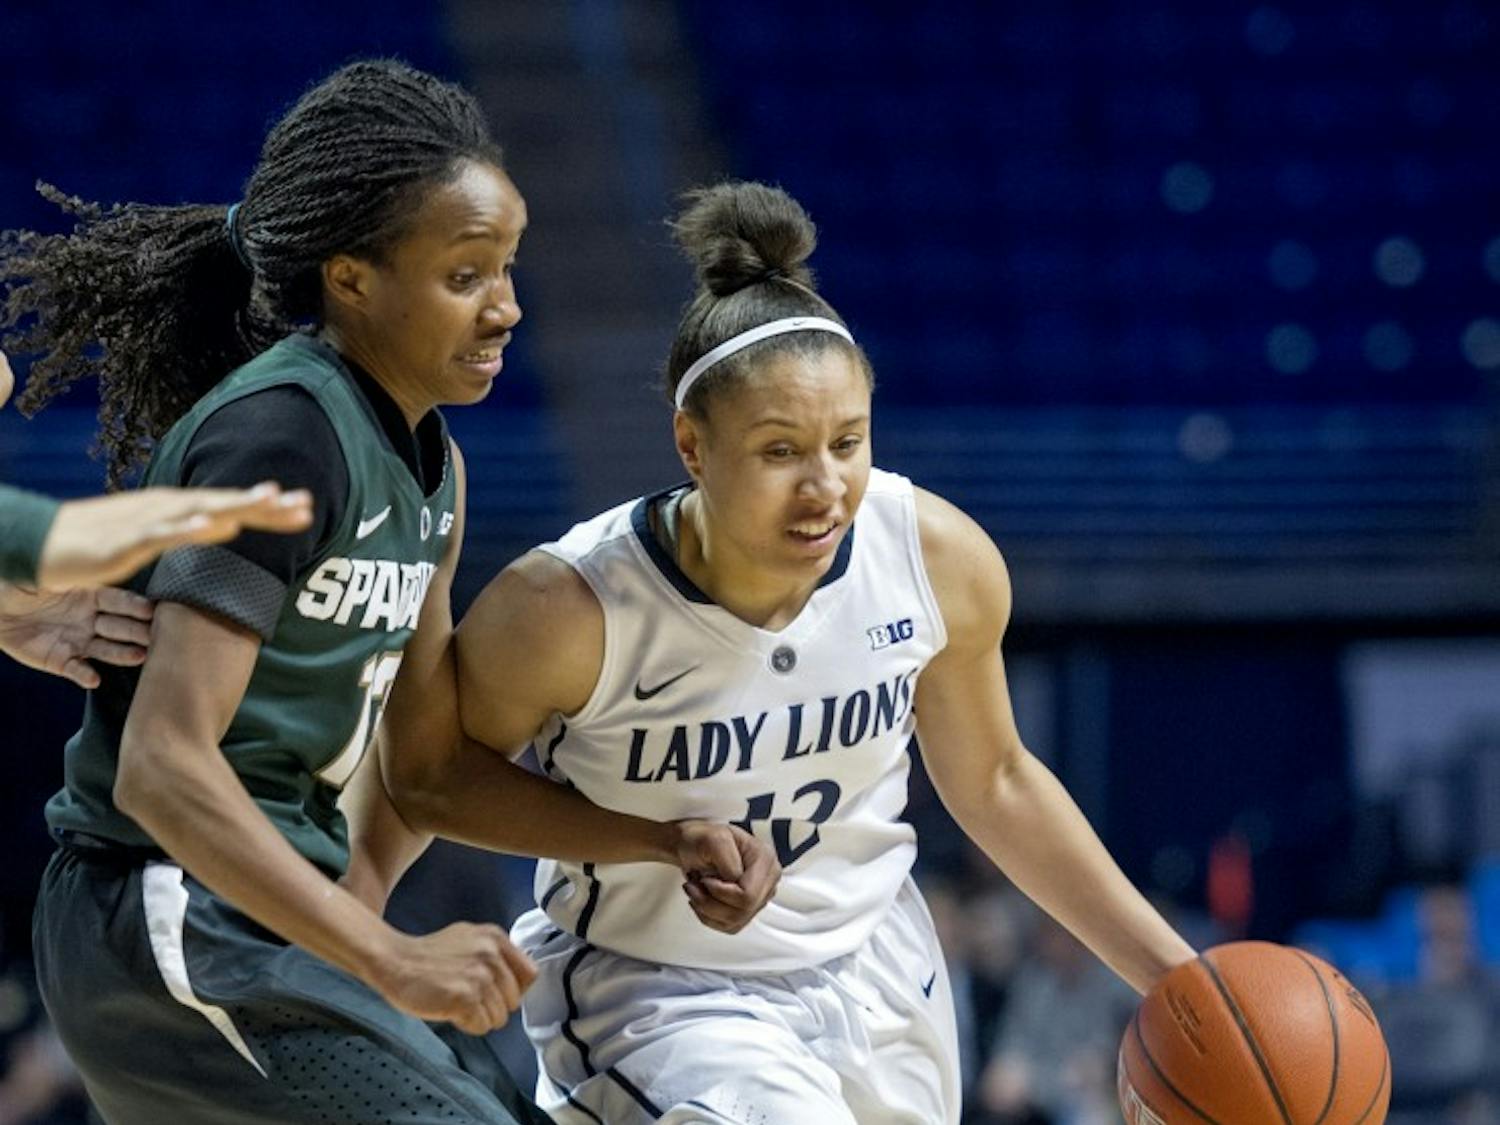 Michigan State's Morgan Green, left, keeps tabs on Penn State's Lindsey Spann on Thursday, Jan. 7, 2016, at the Bryce Jordan Center in University Park, Pa. Michigan State won, 71-55. (Abby Drey/Centre Daily Times/TNS)